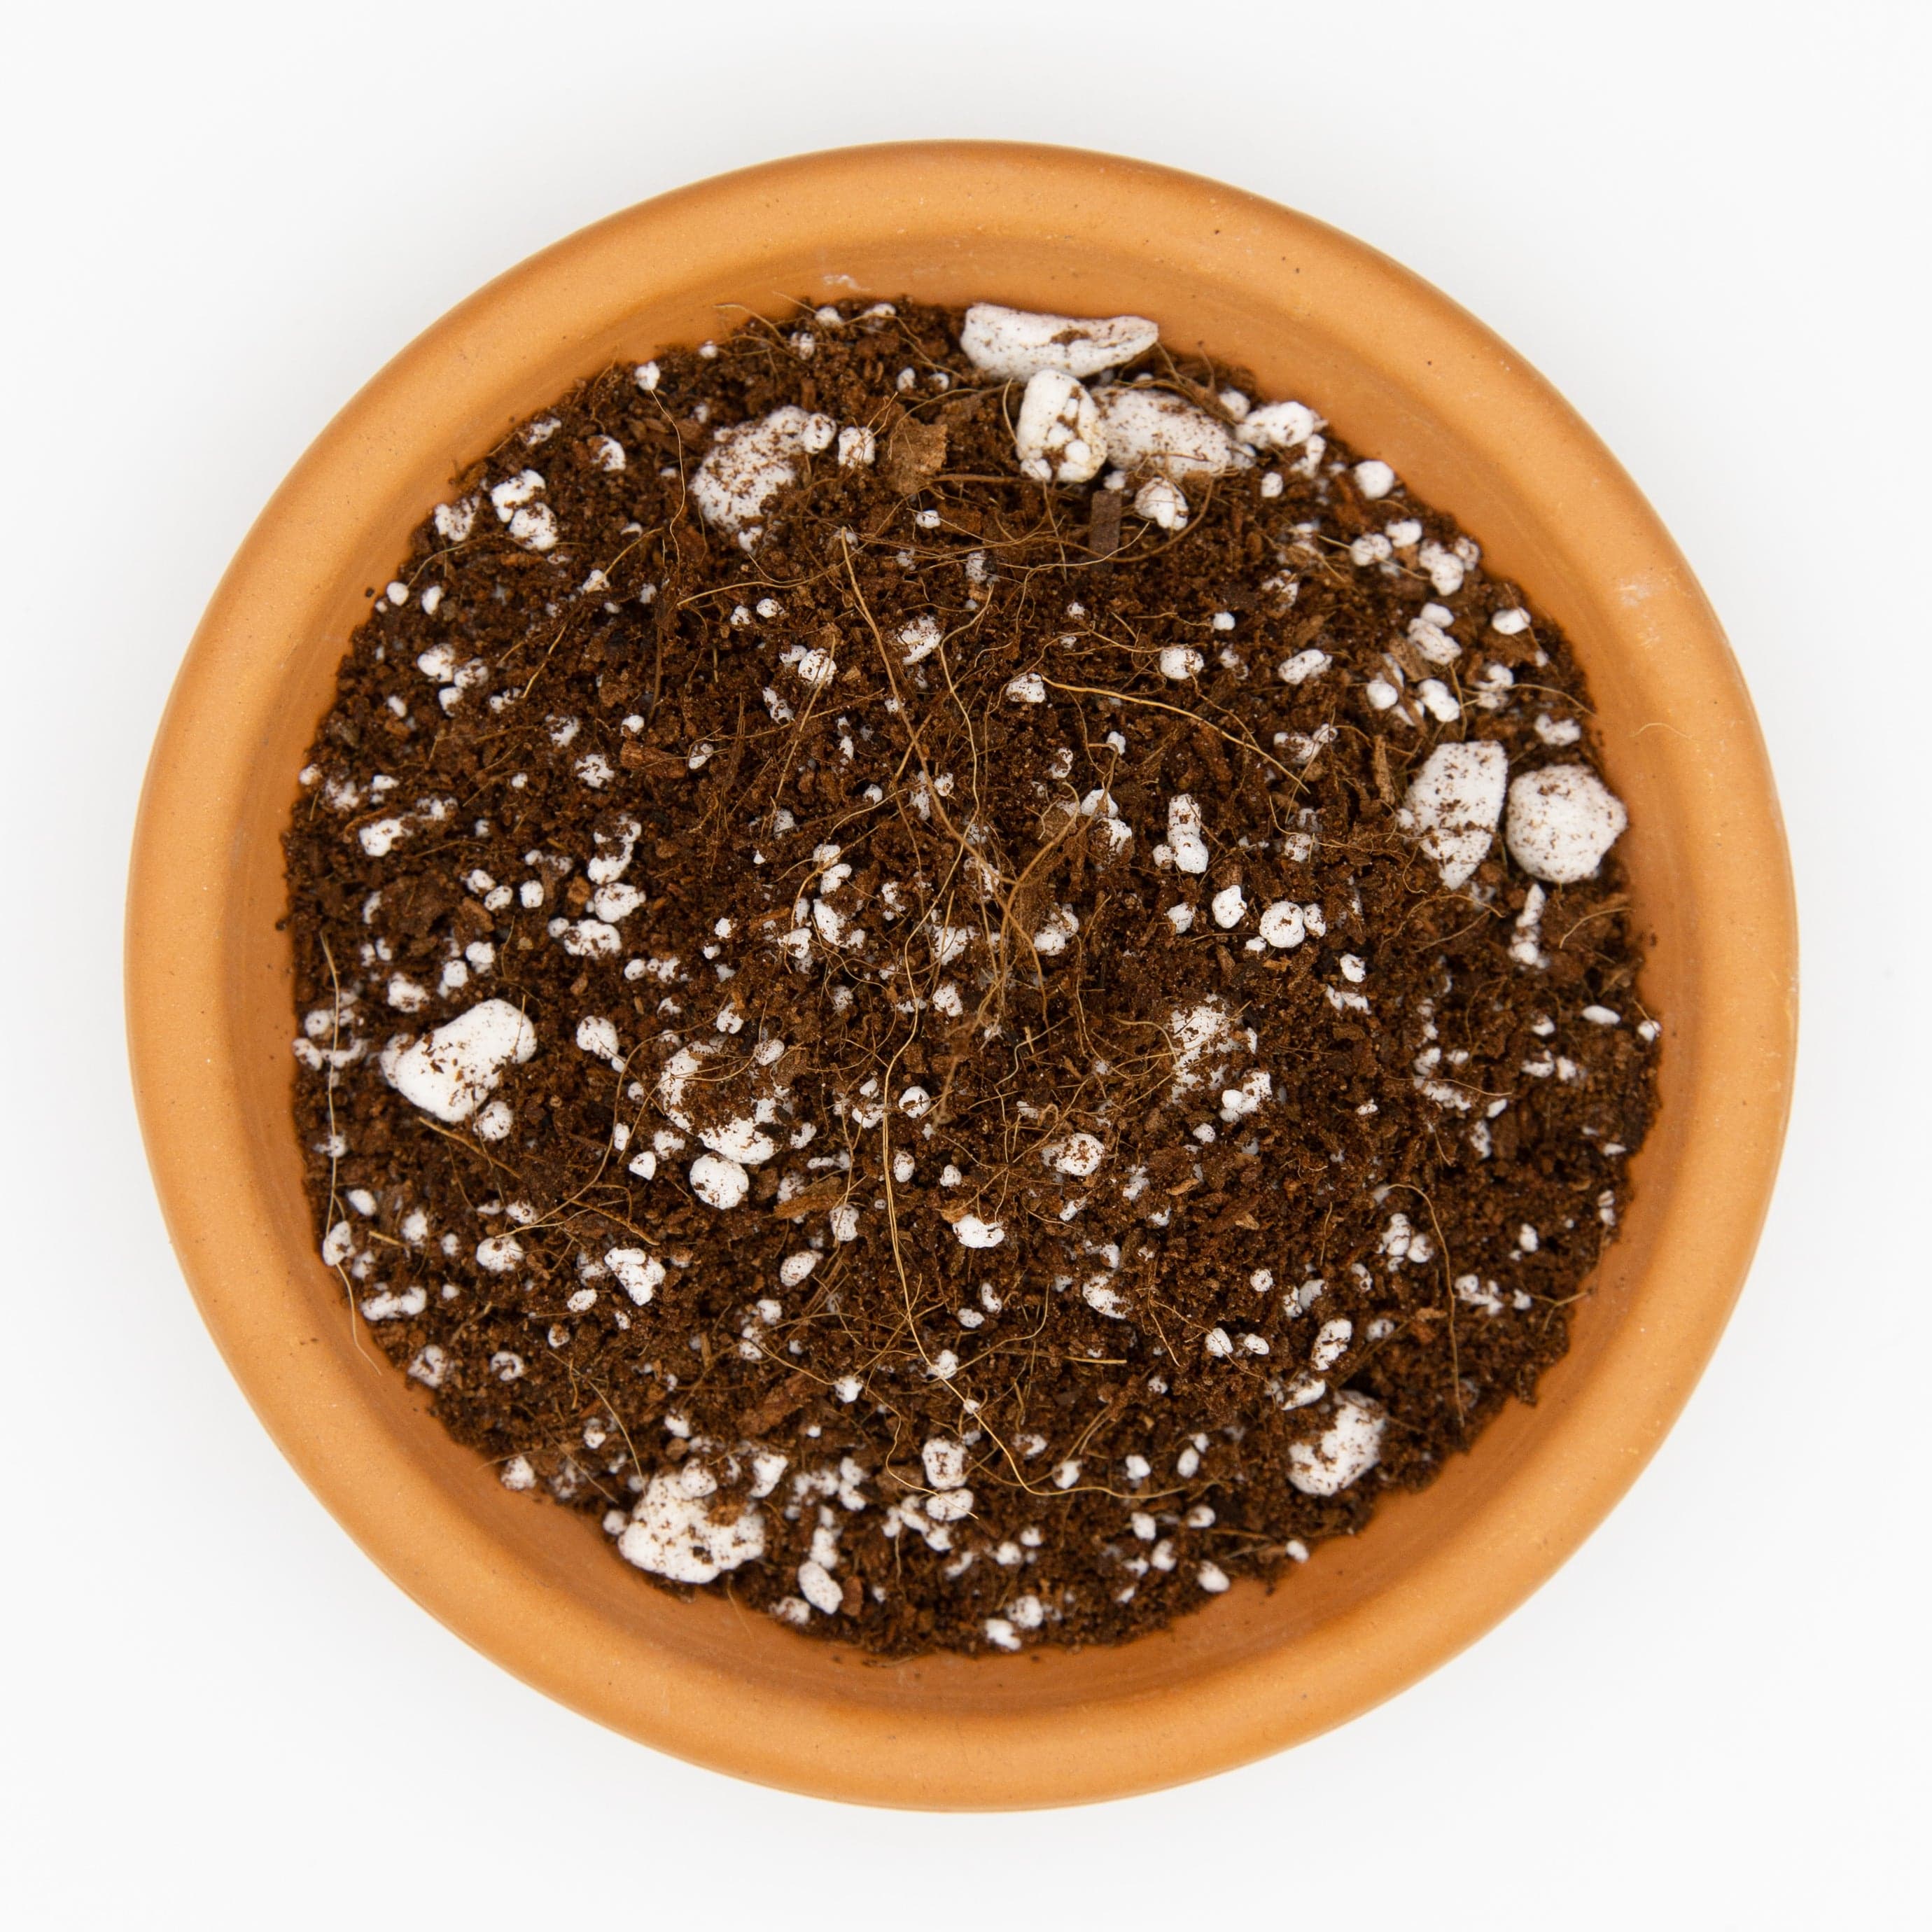 Dr Greenthumbs Grow Mediums Coco Coir + Perlite 70/30 (Washed & Buffered)